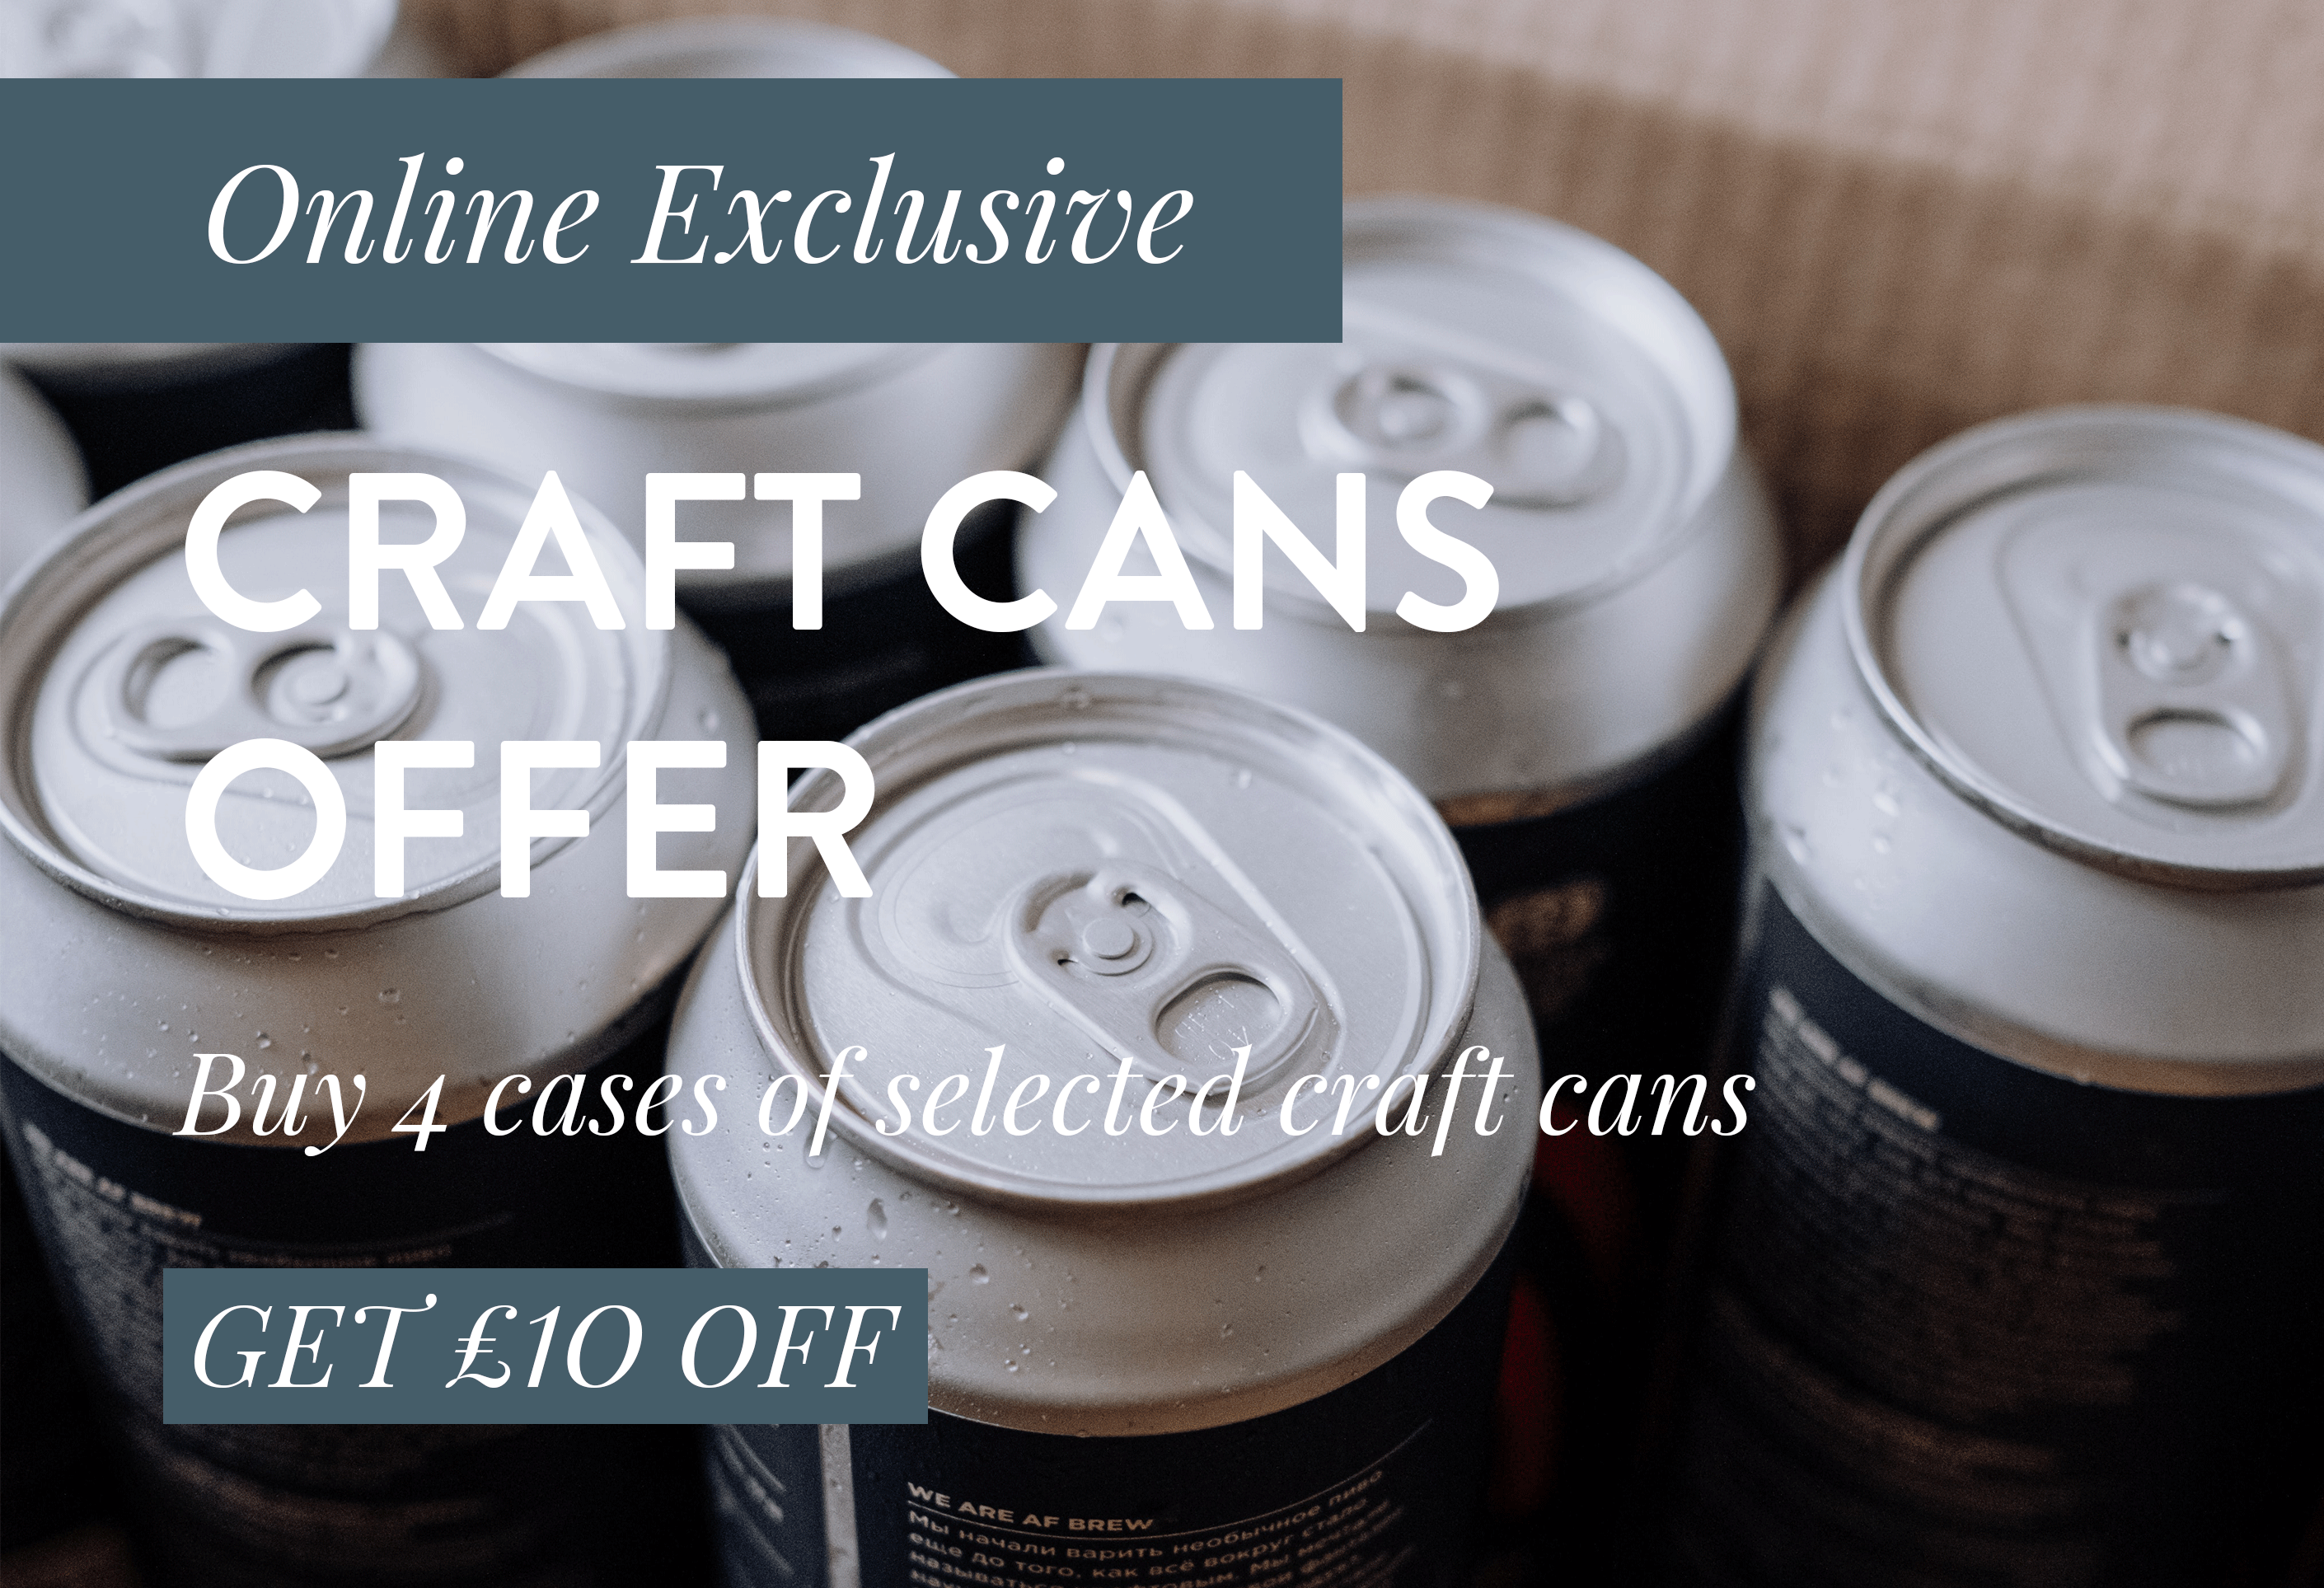 Craft Can deal